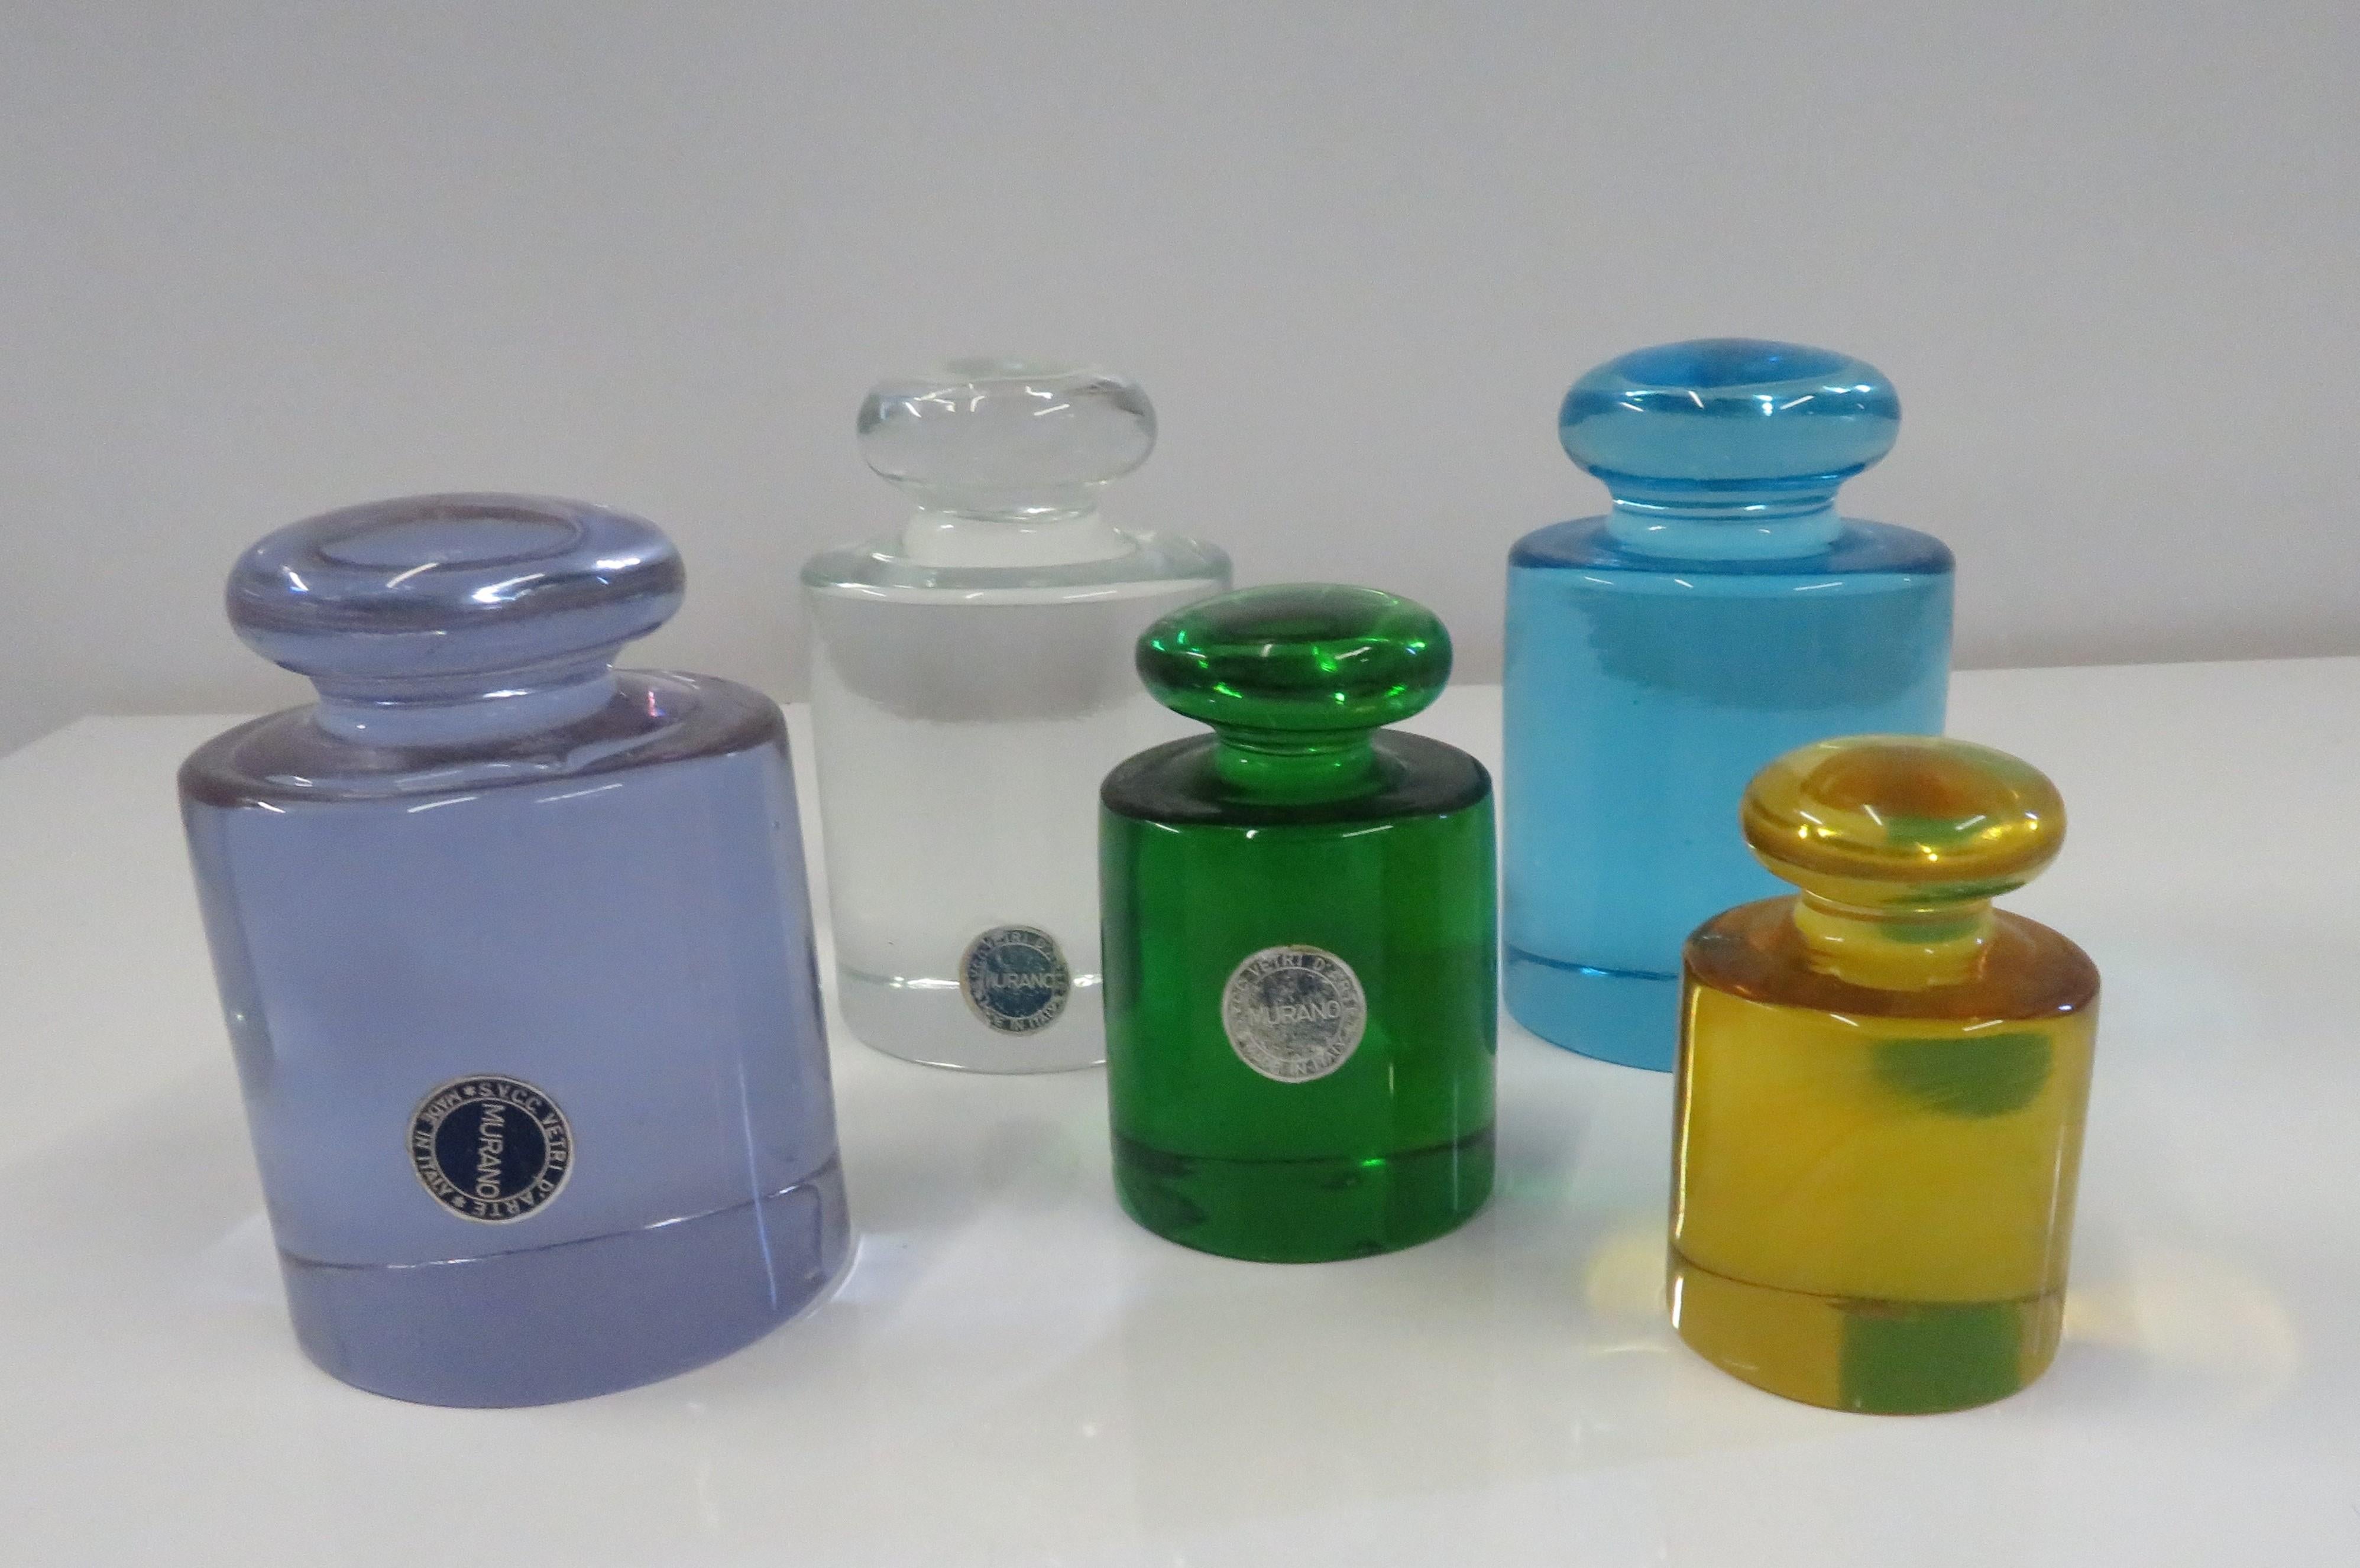 Italian Mid-Century Modern Group of 5 Murano Colored Glass Paperweights 1950s Italy For Sale